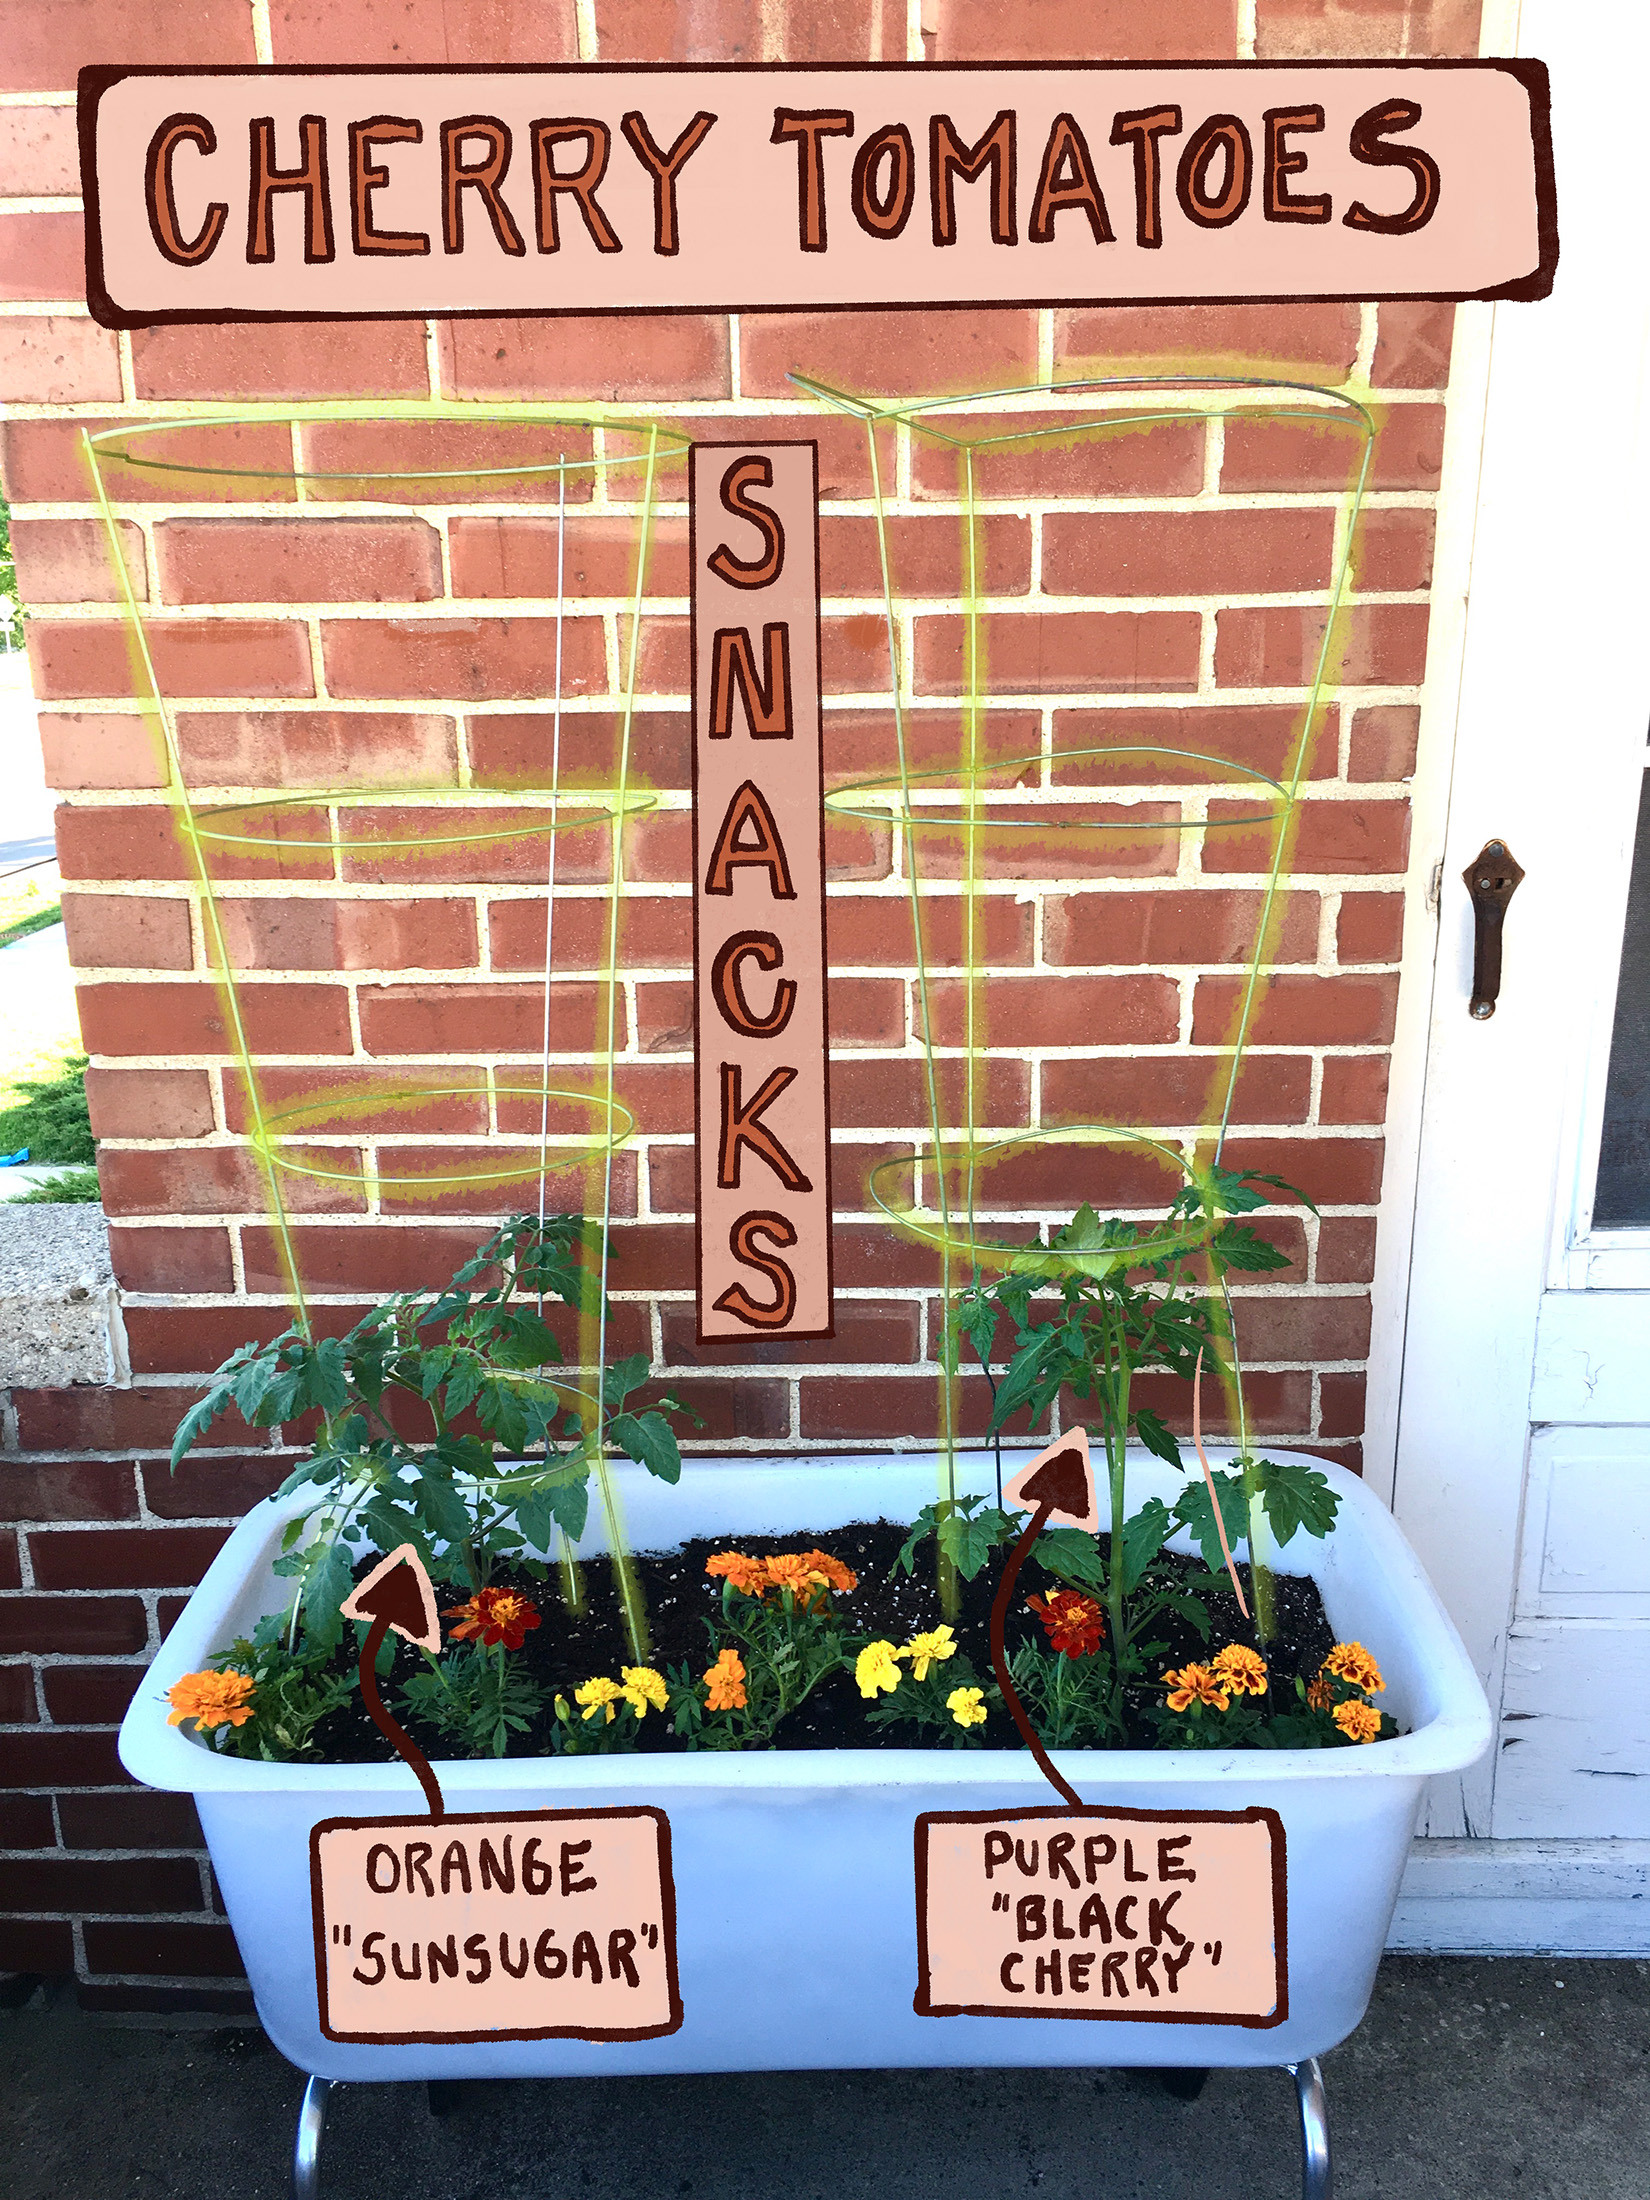 A planter sits against a brick wall growing two small tomato transplants with cages over them, and surrounded by marigolds